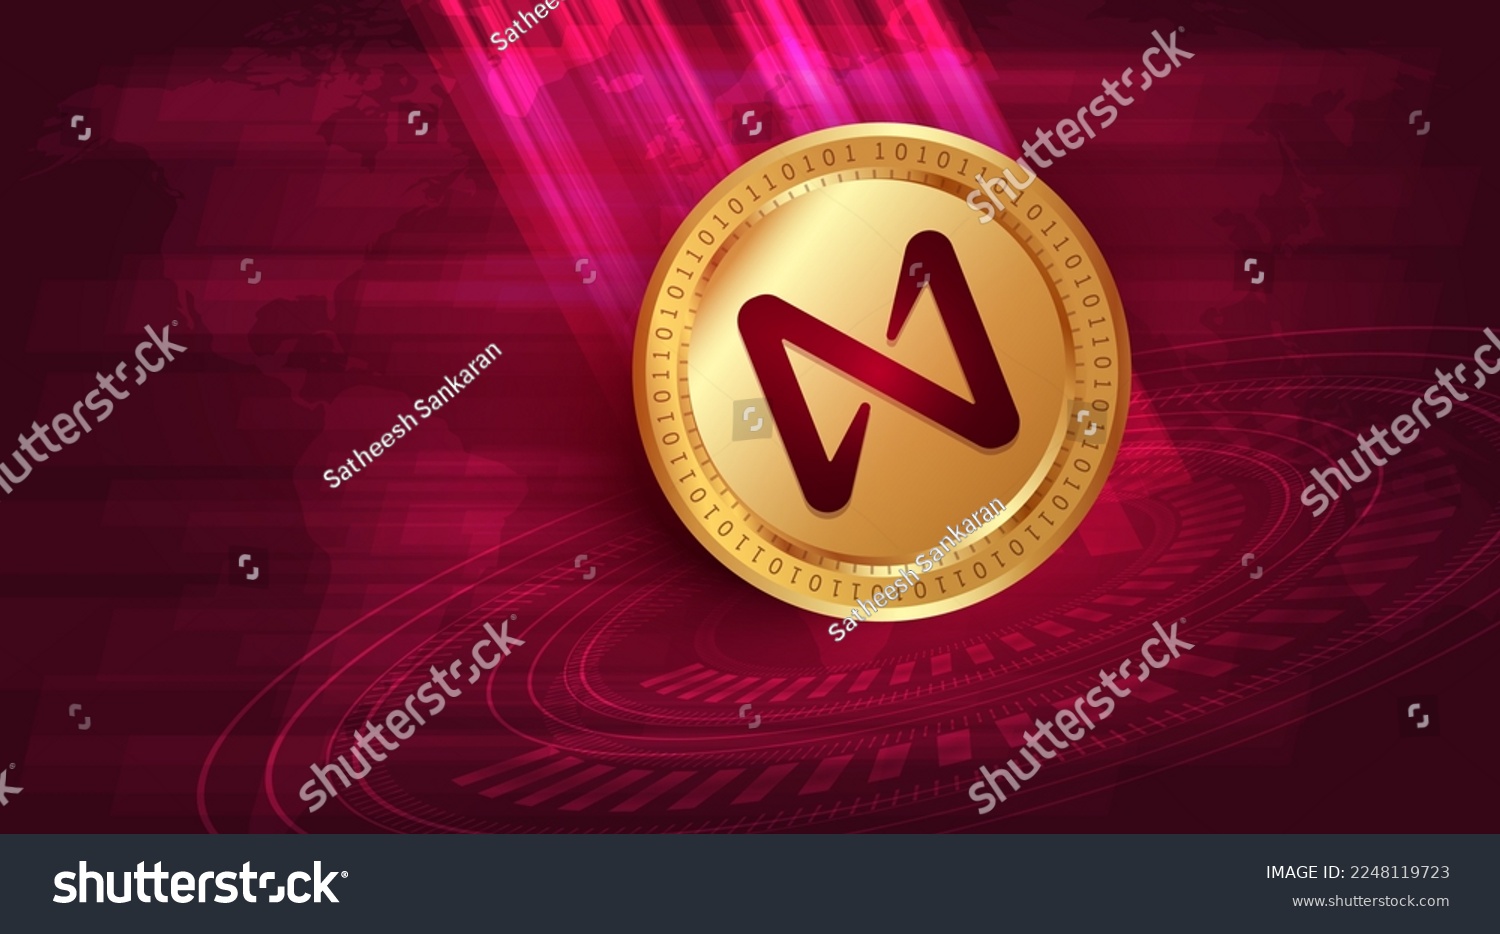 SVG of Near Protocol (NEAR) crypto currency banner and background svg